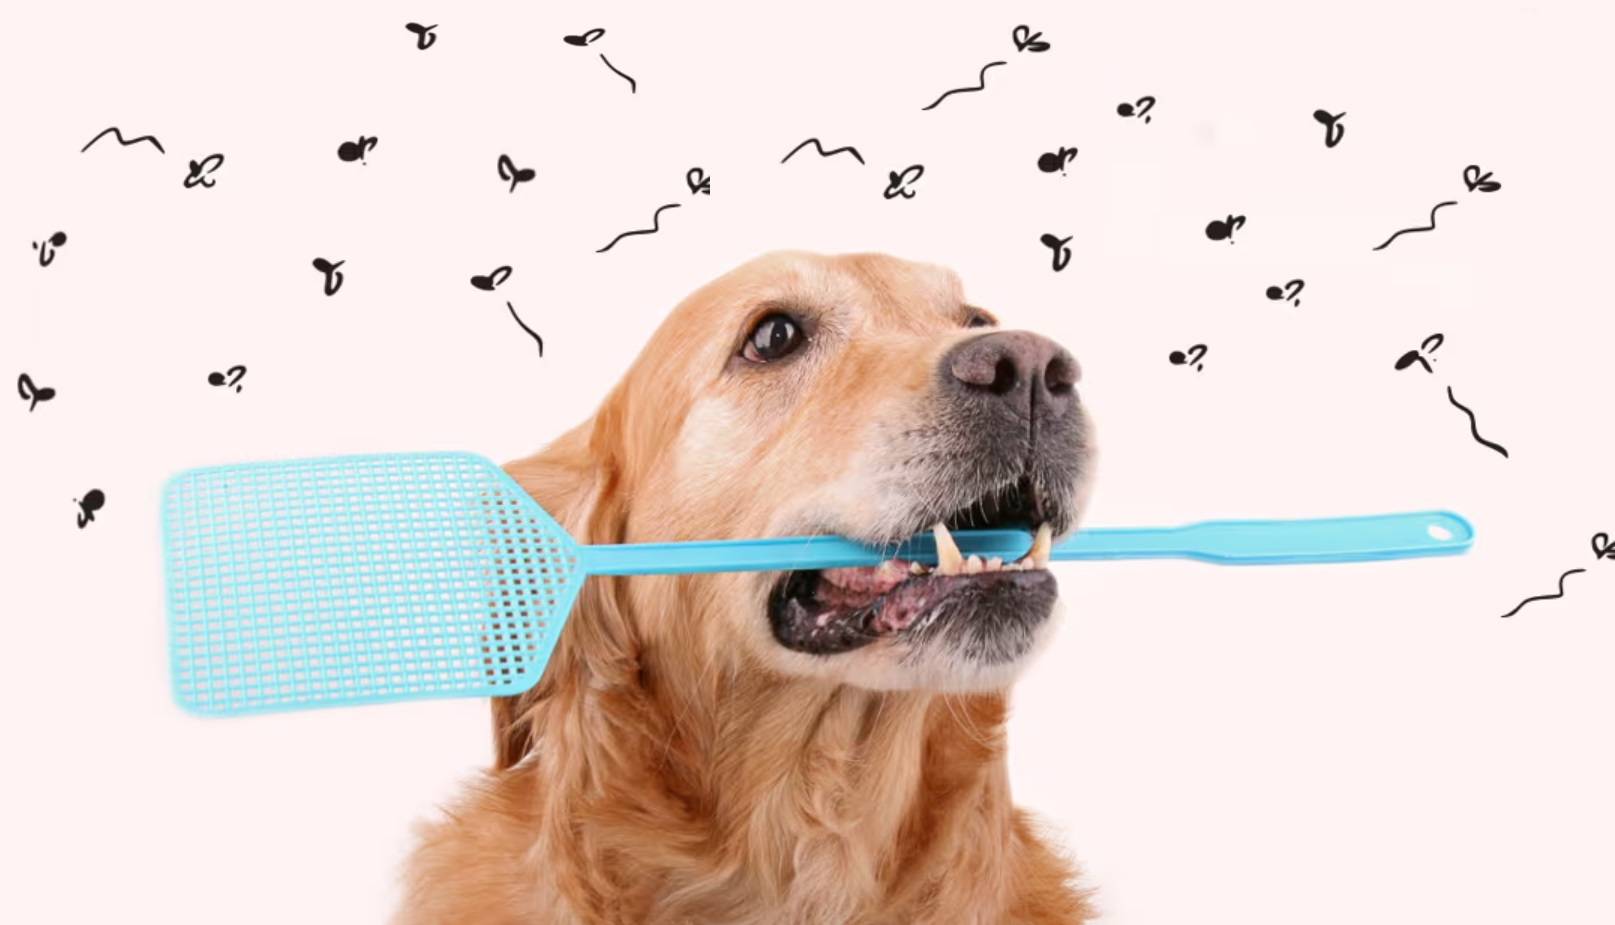 A retriever holding a fly swatter